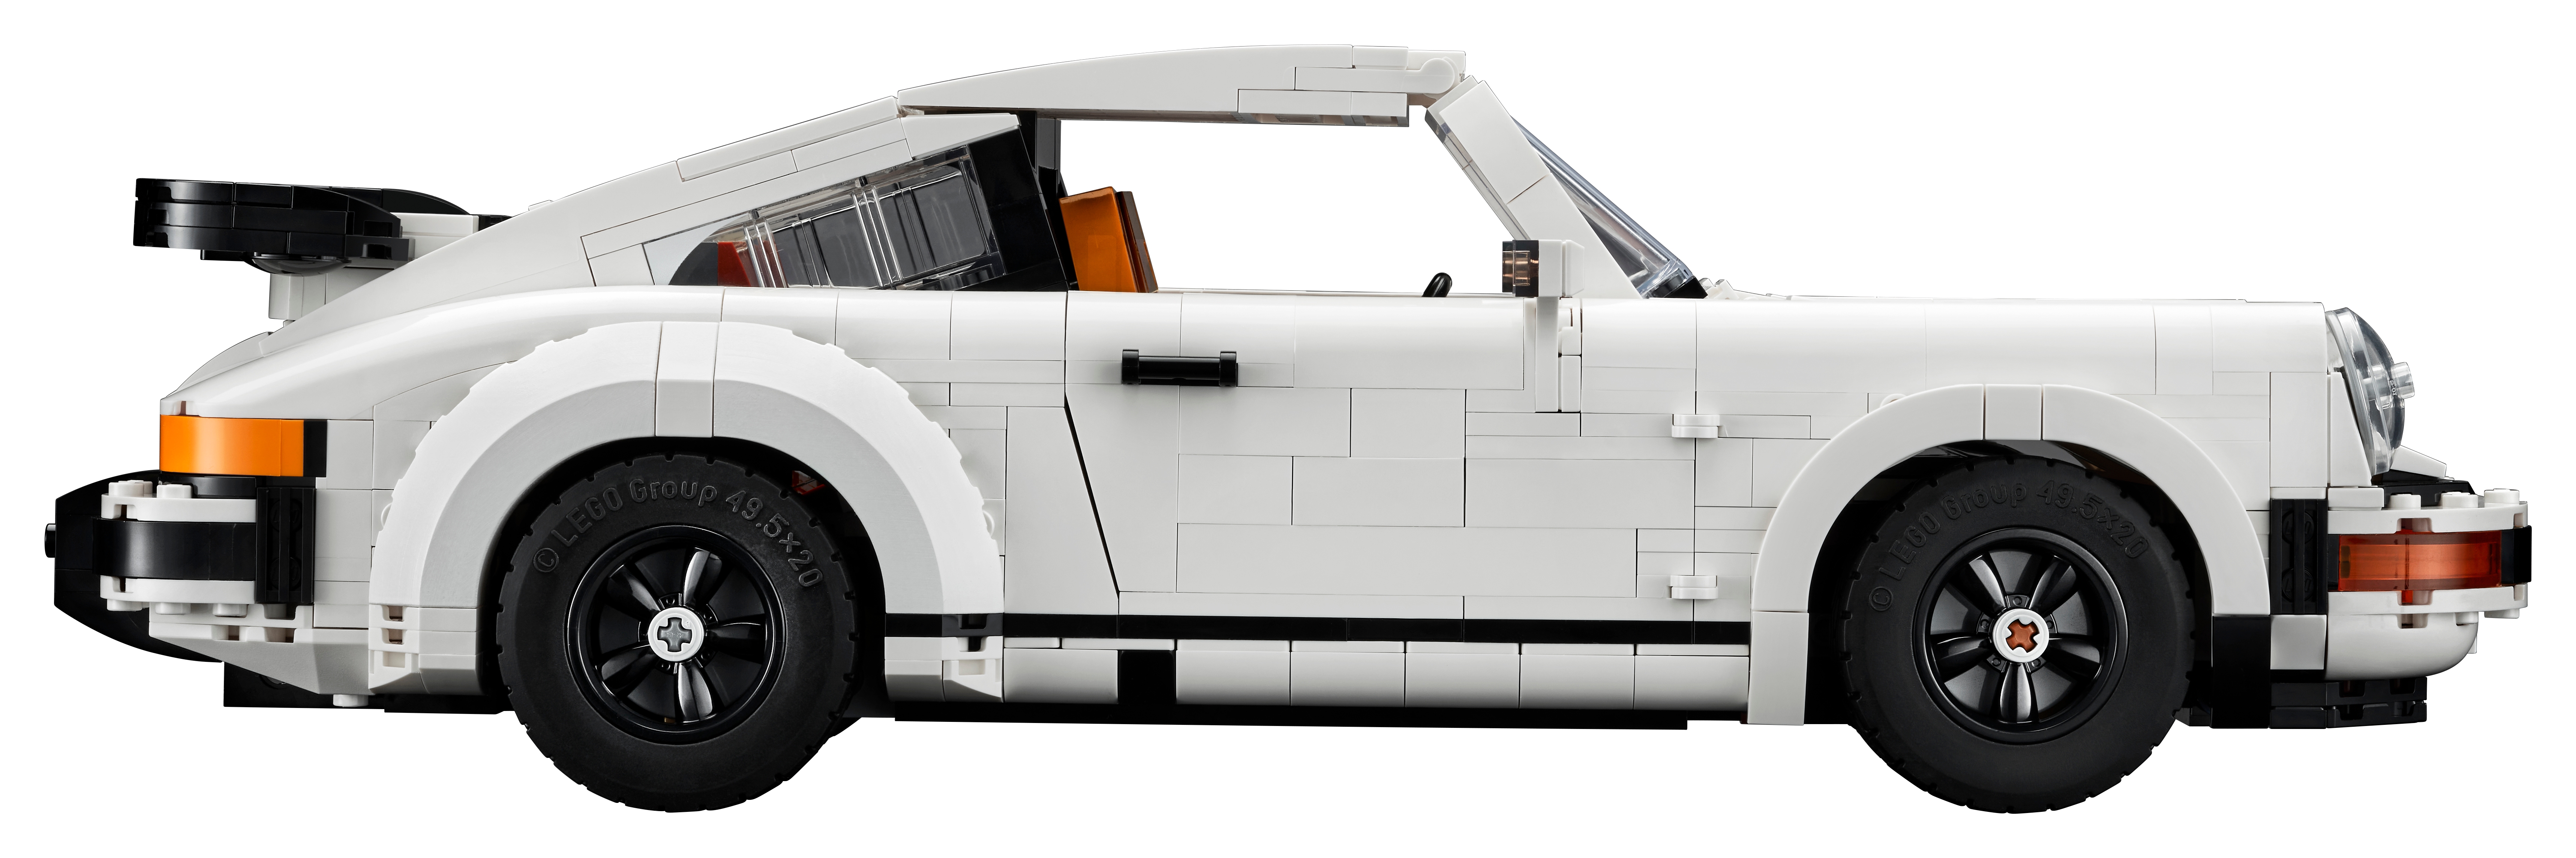 New 2-In-1 Porsche Lego Kit Can Be a 911 Turbo or a 911 Targa